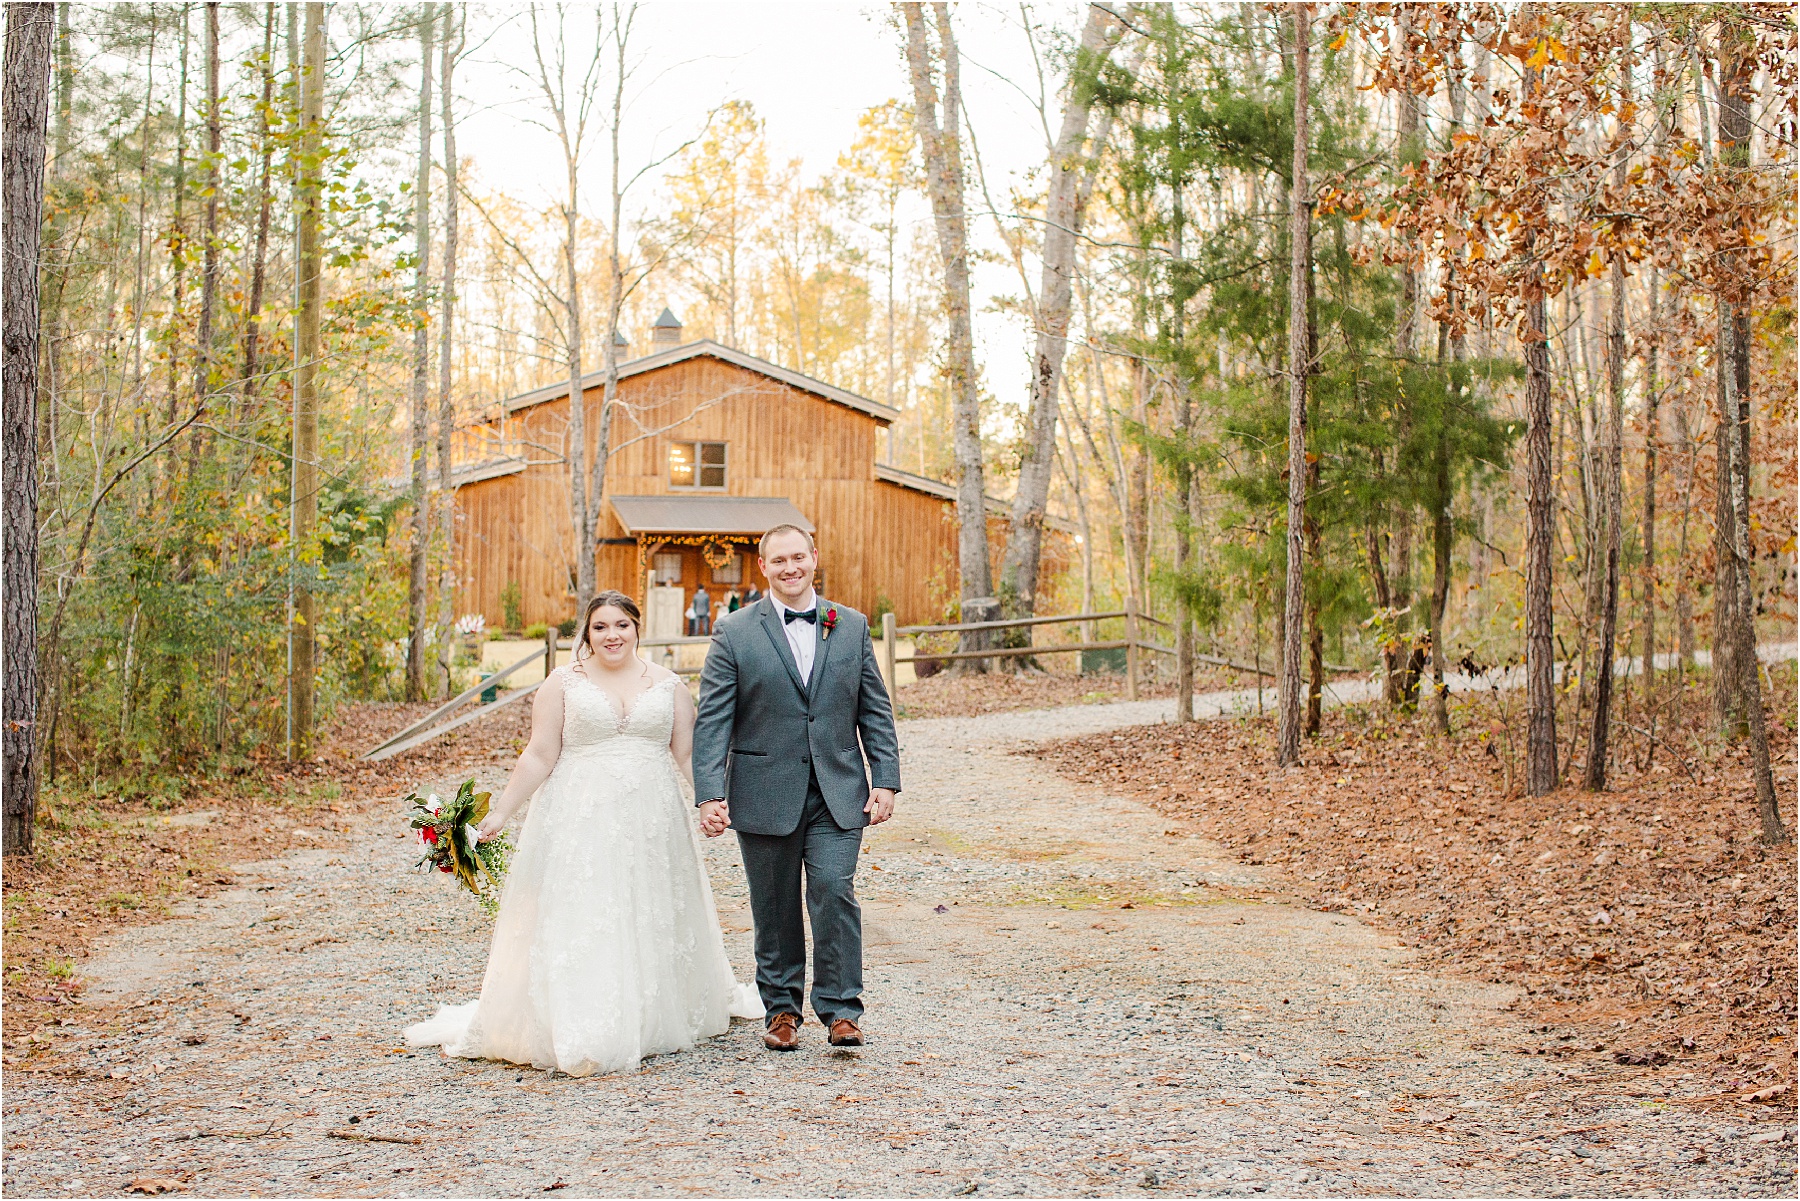 man and women in wedding attire walk towards camera with barn in background